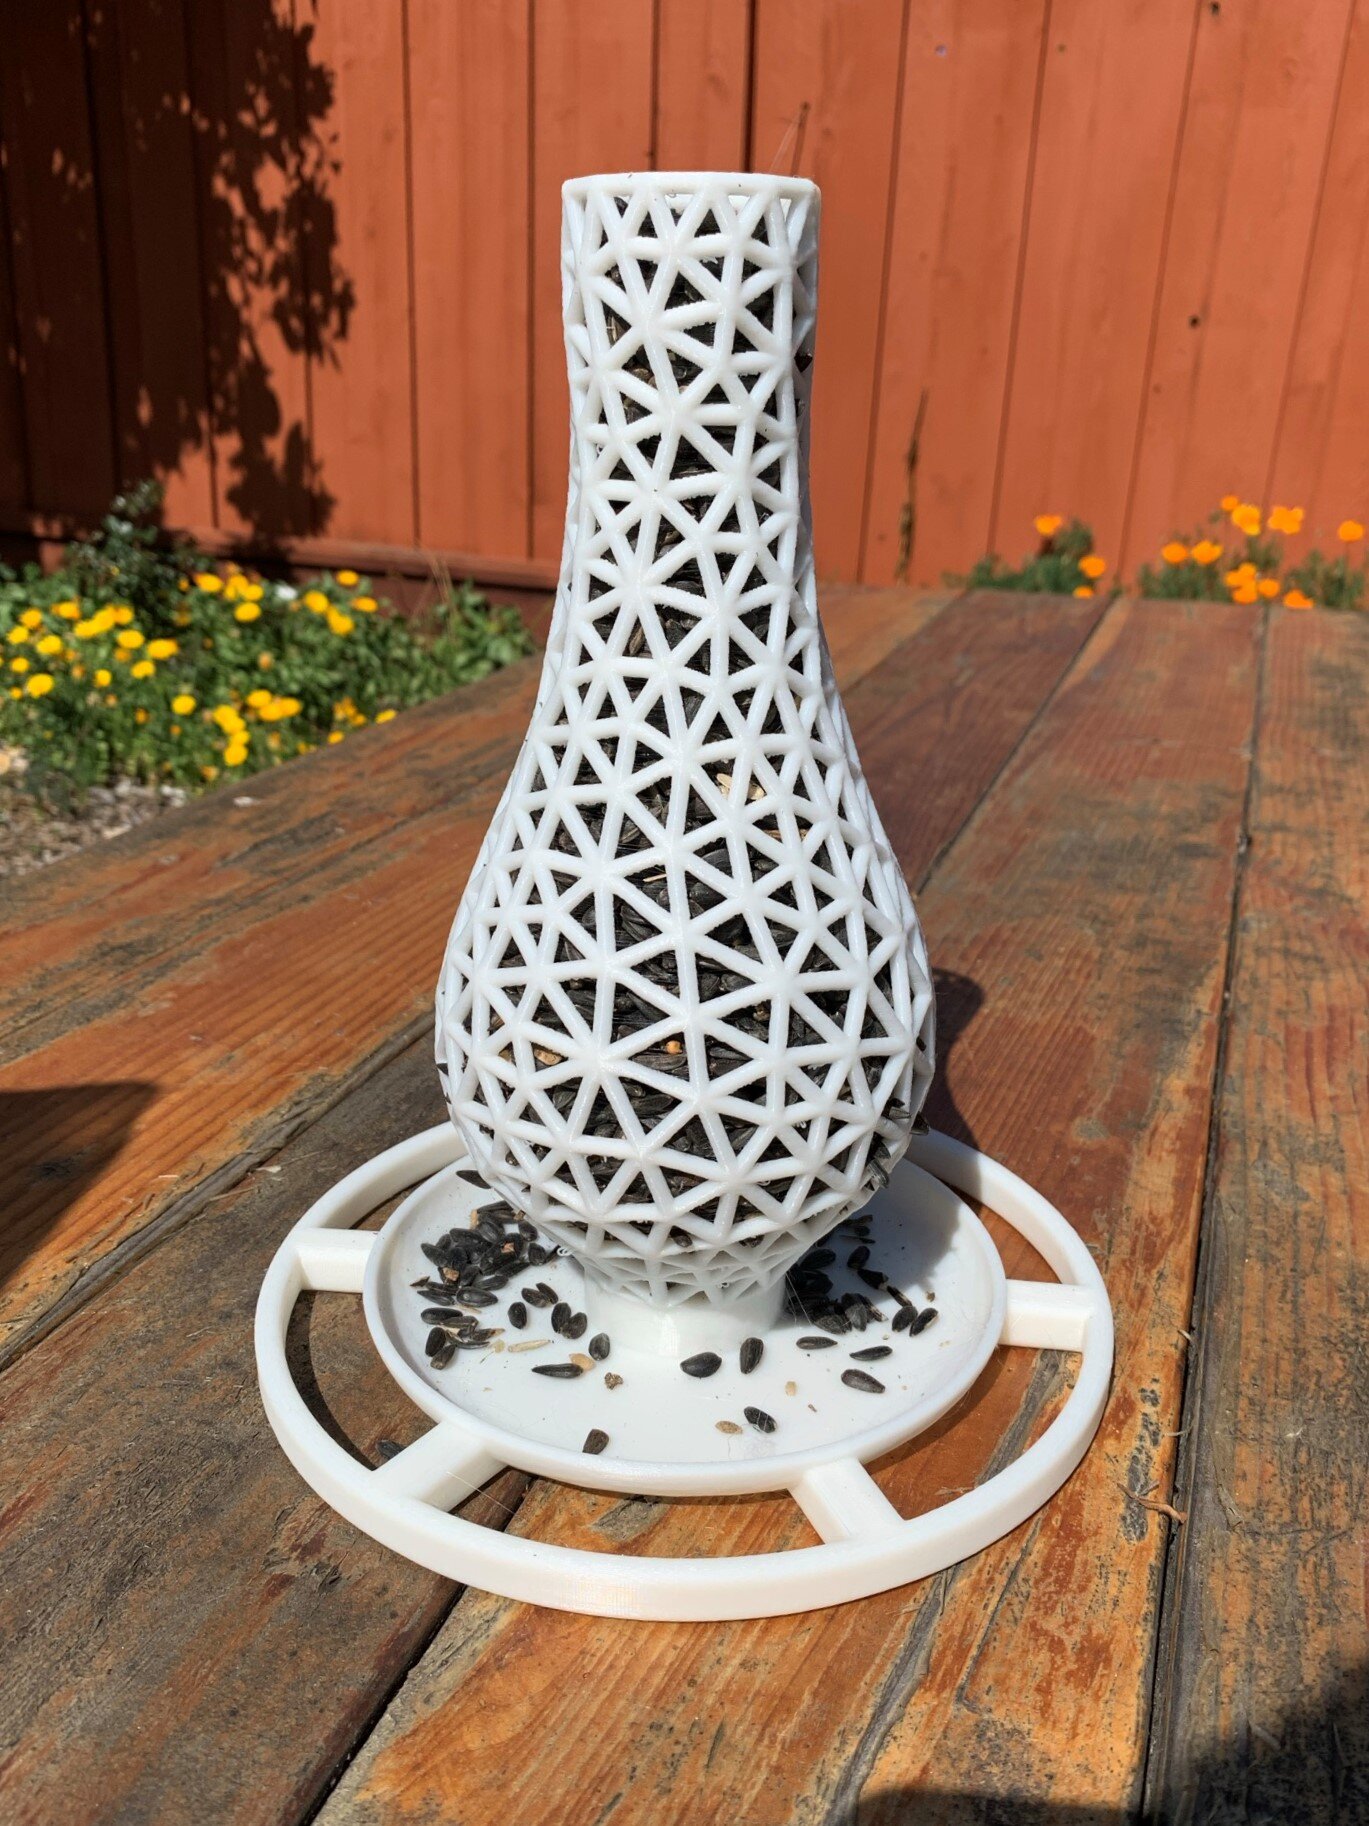  Iteration 2 of my birdfeeder! The main design changes were to strengthen the member thickness, smooth out the mesh, and to add a feeding dish/ledges. 